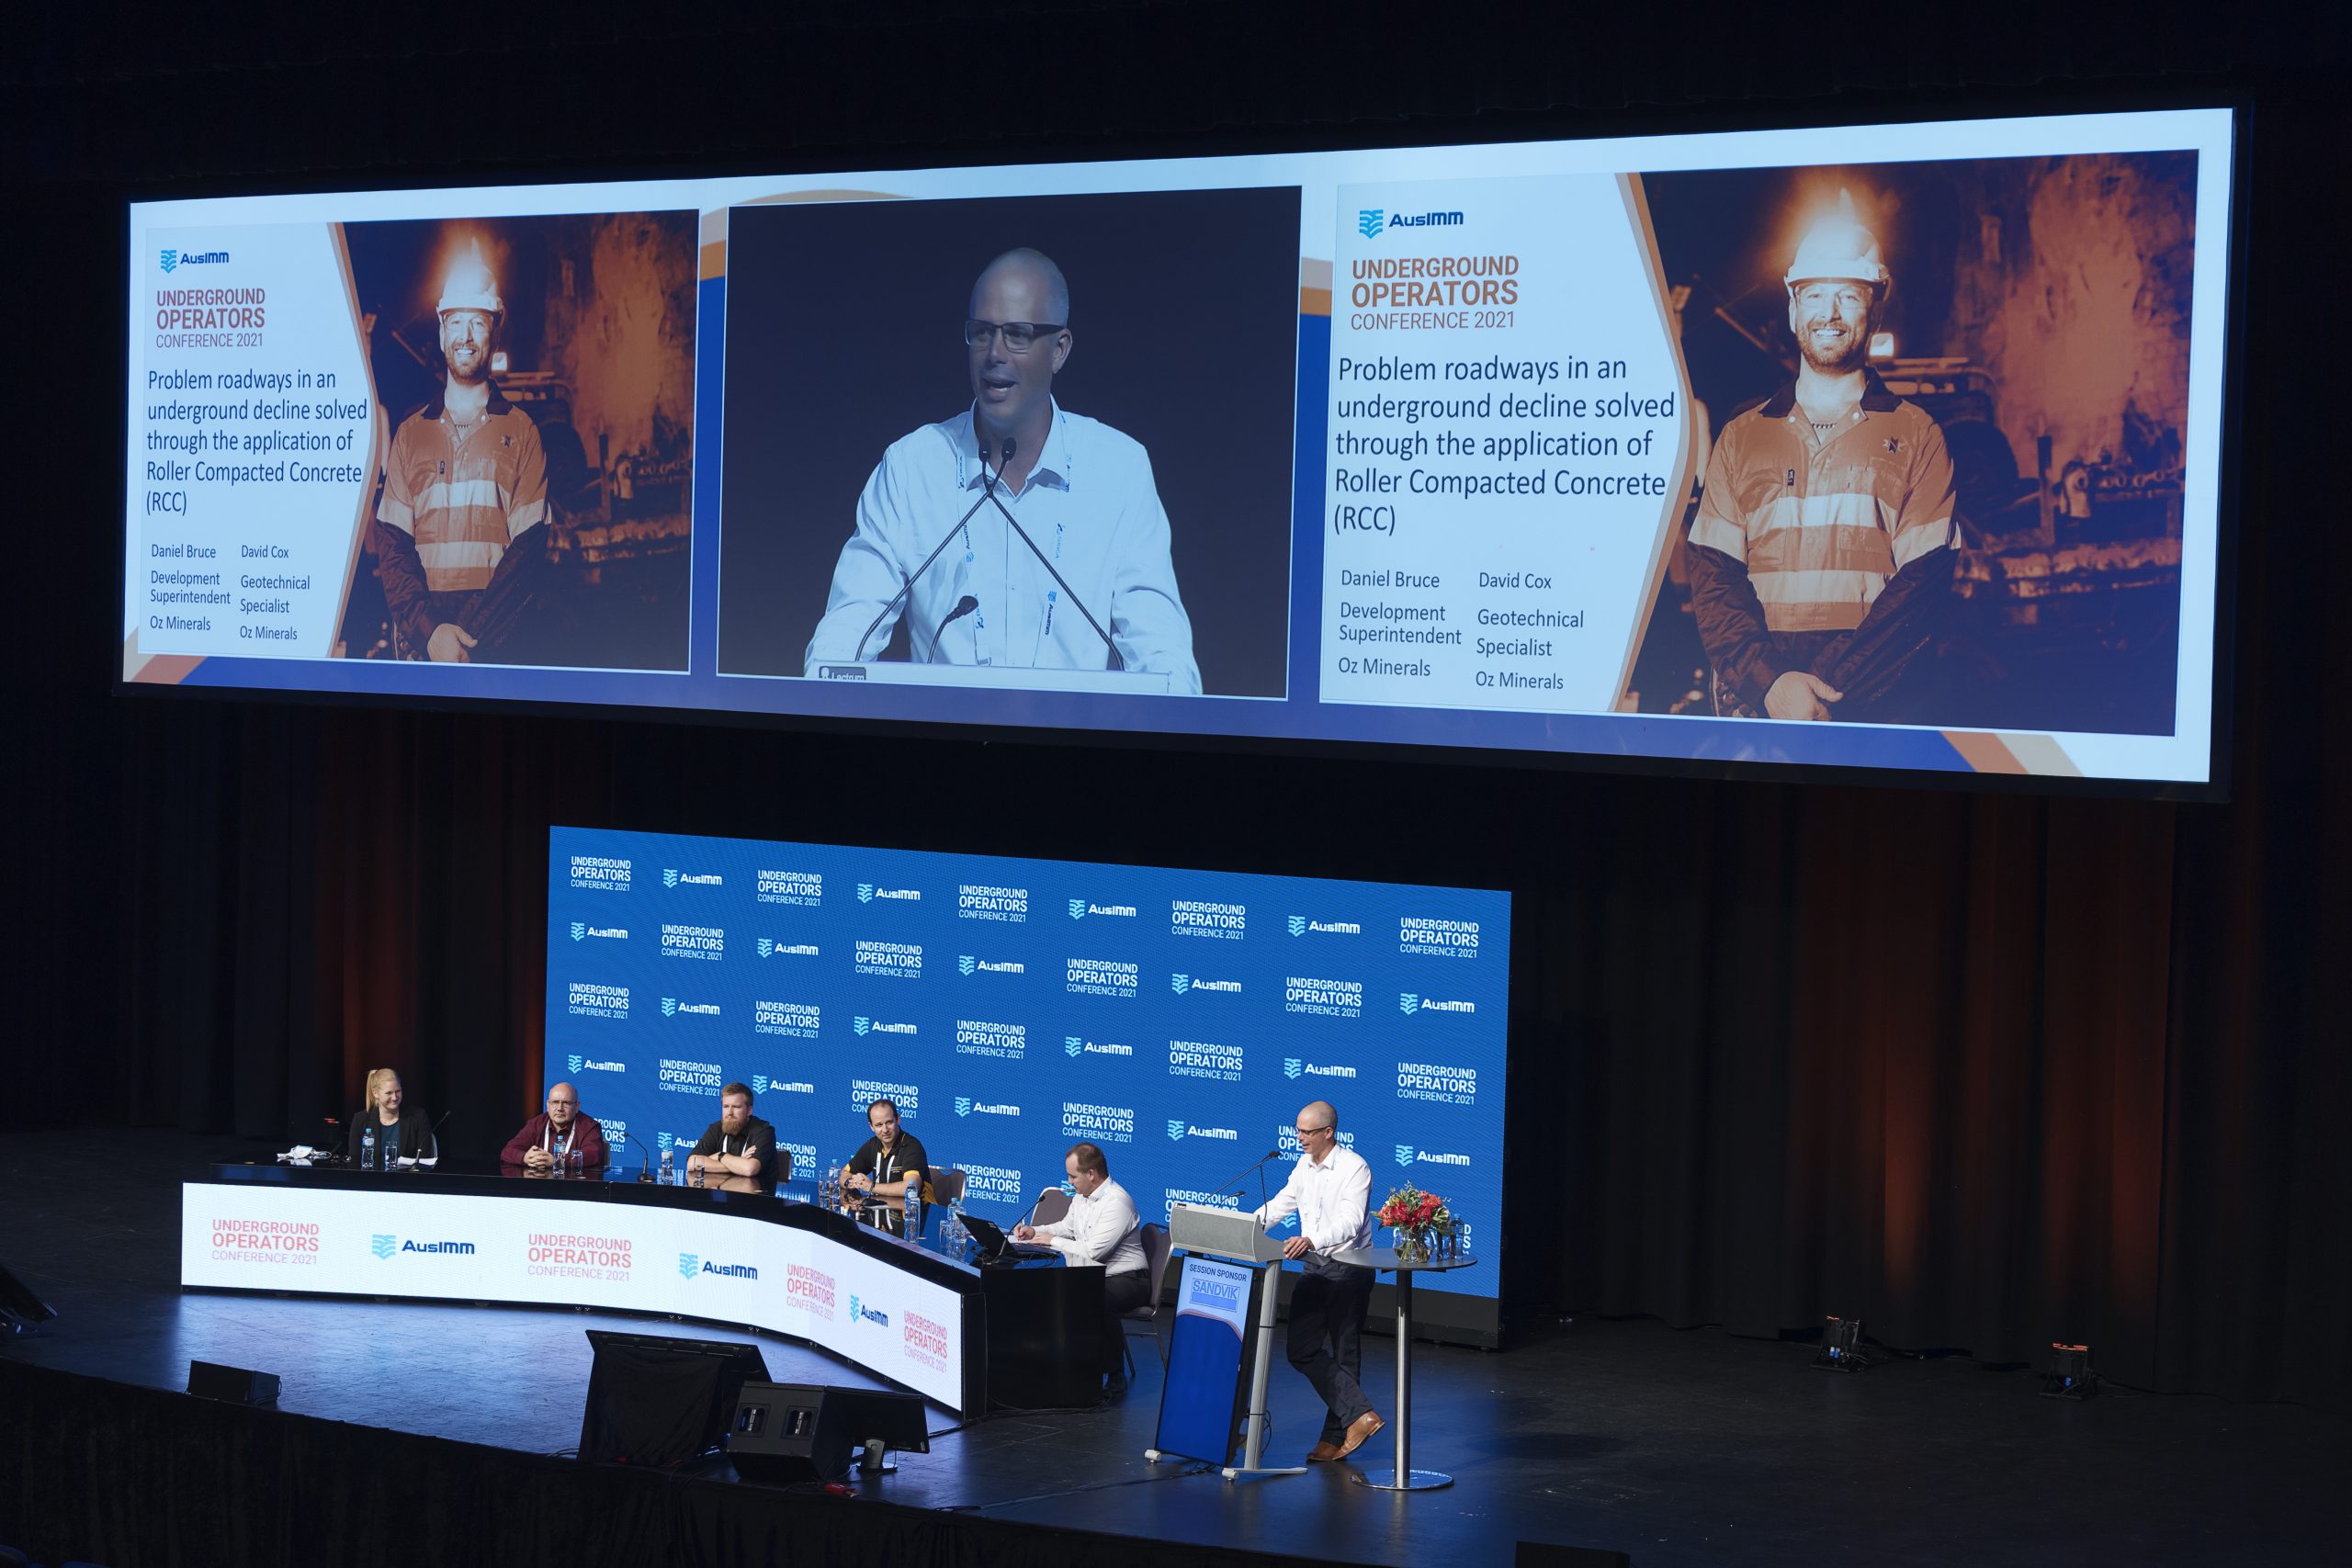 MineGeoTech and MineLiDAR at the AusIMM Underground Operators Conference 2021 - Mining Underground Services